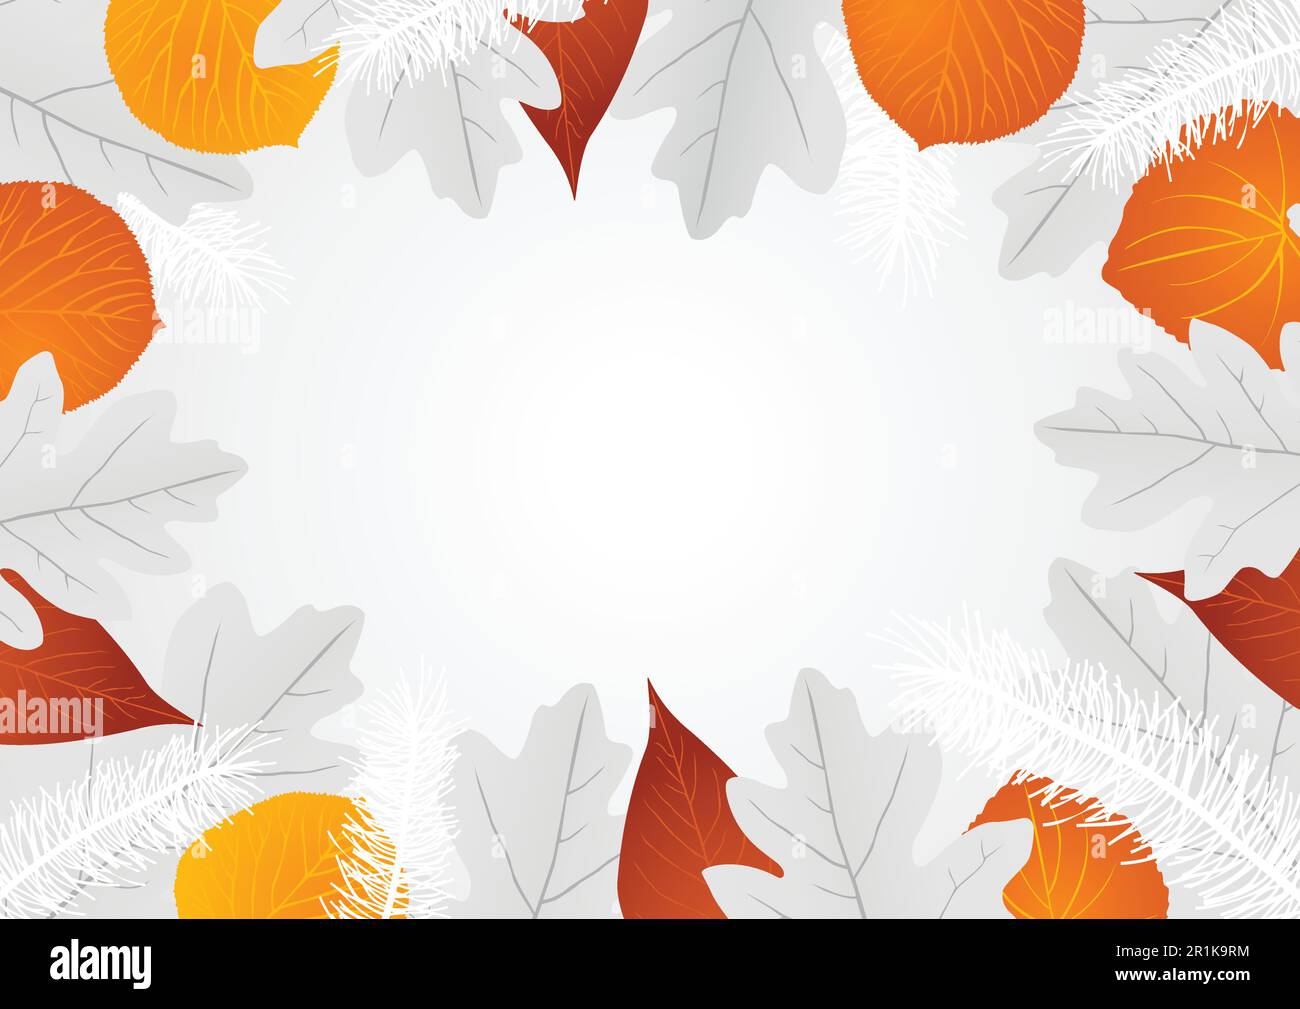 Decorative leaves background Stock Vector